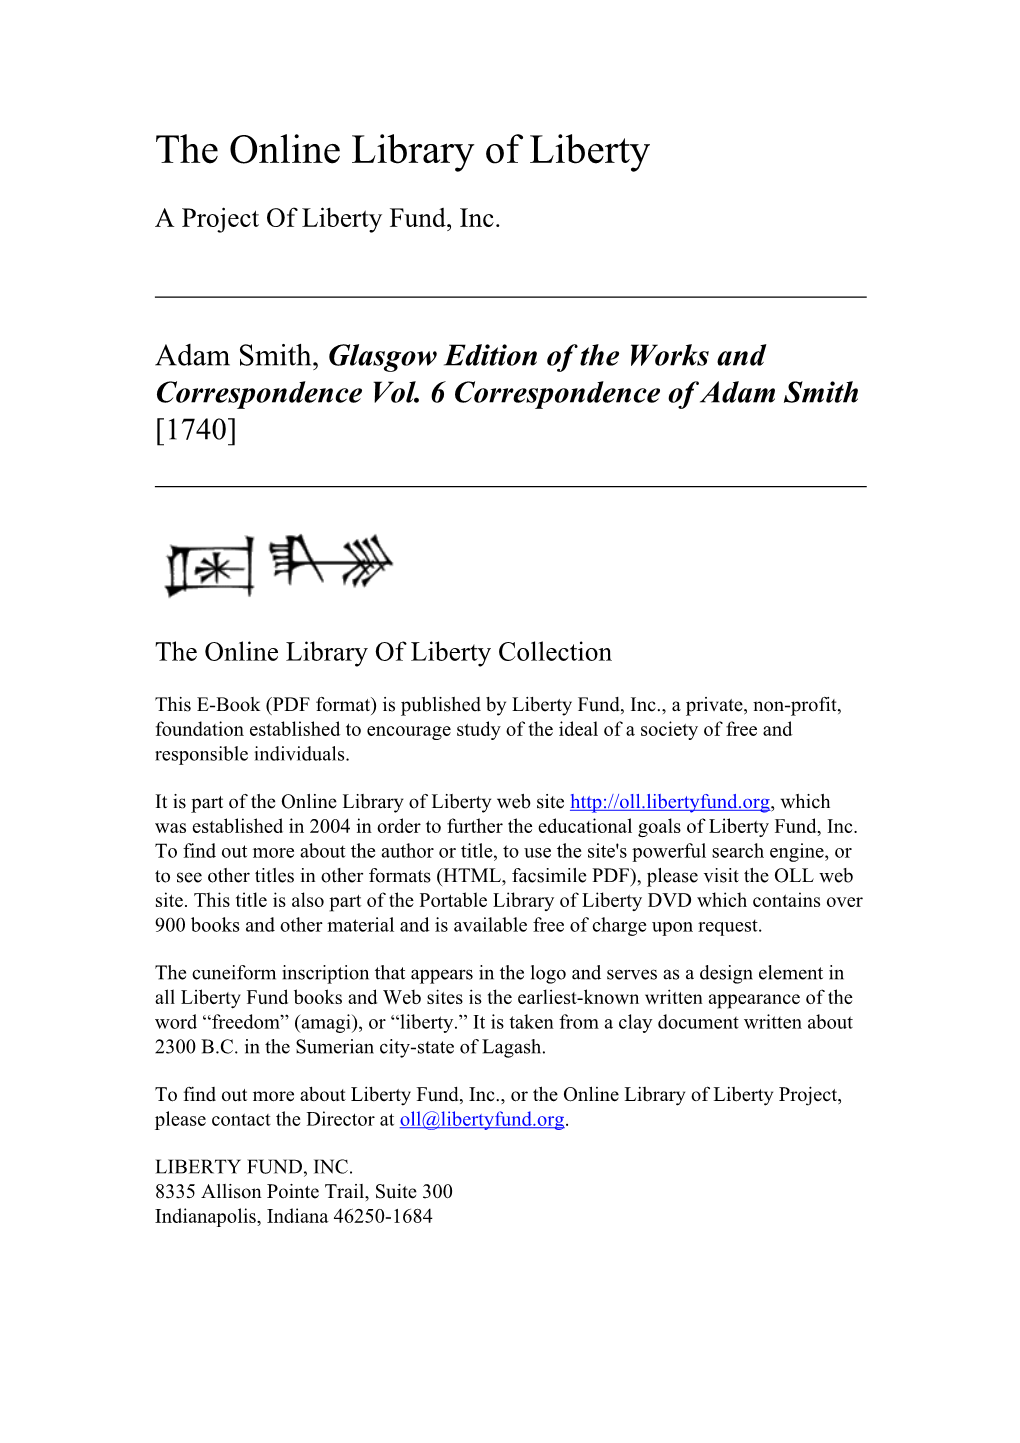 Online Library of Liberty: Glasgow Edition of the Works and Correspondence Vol